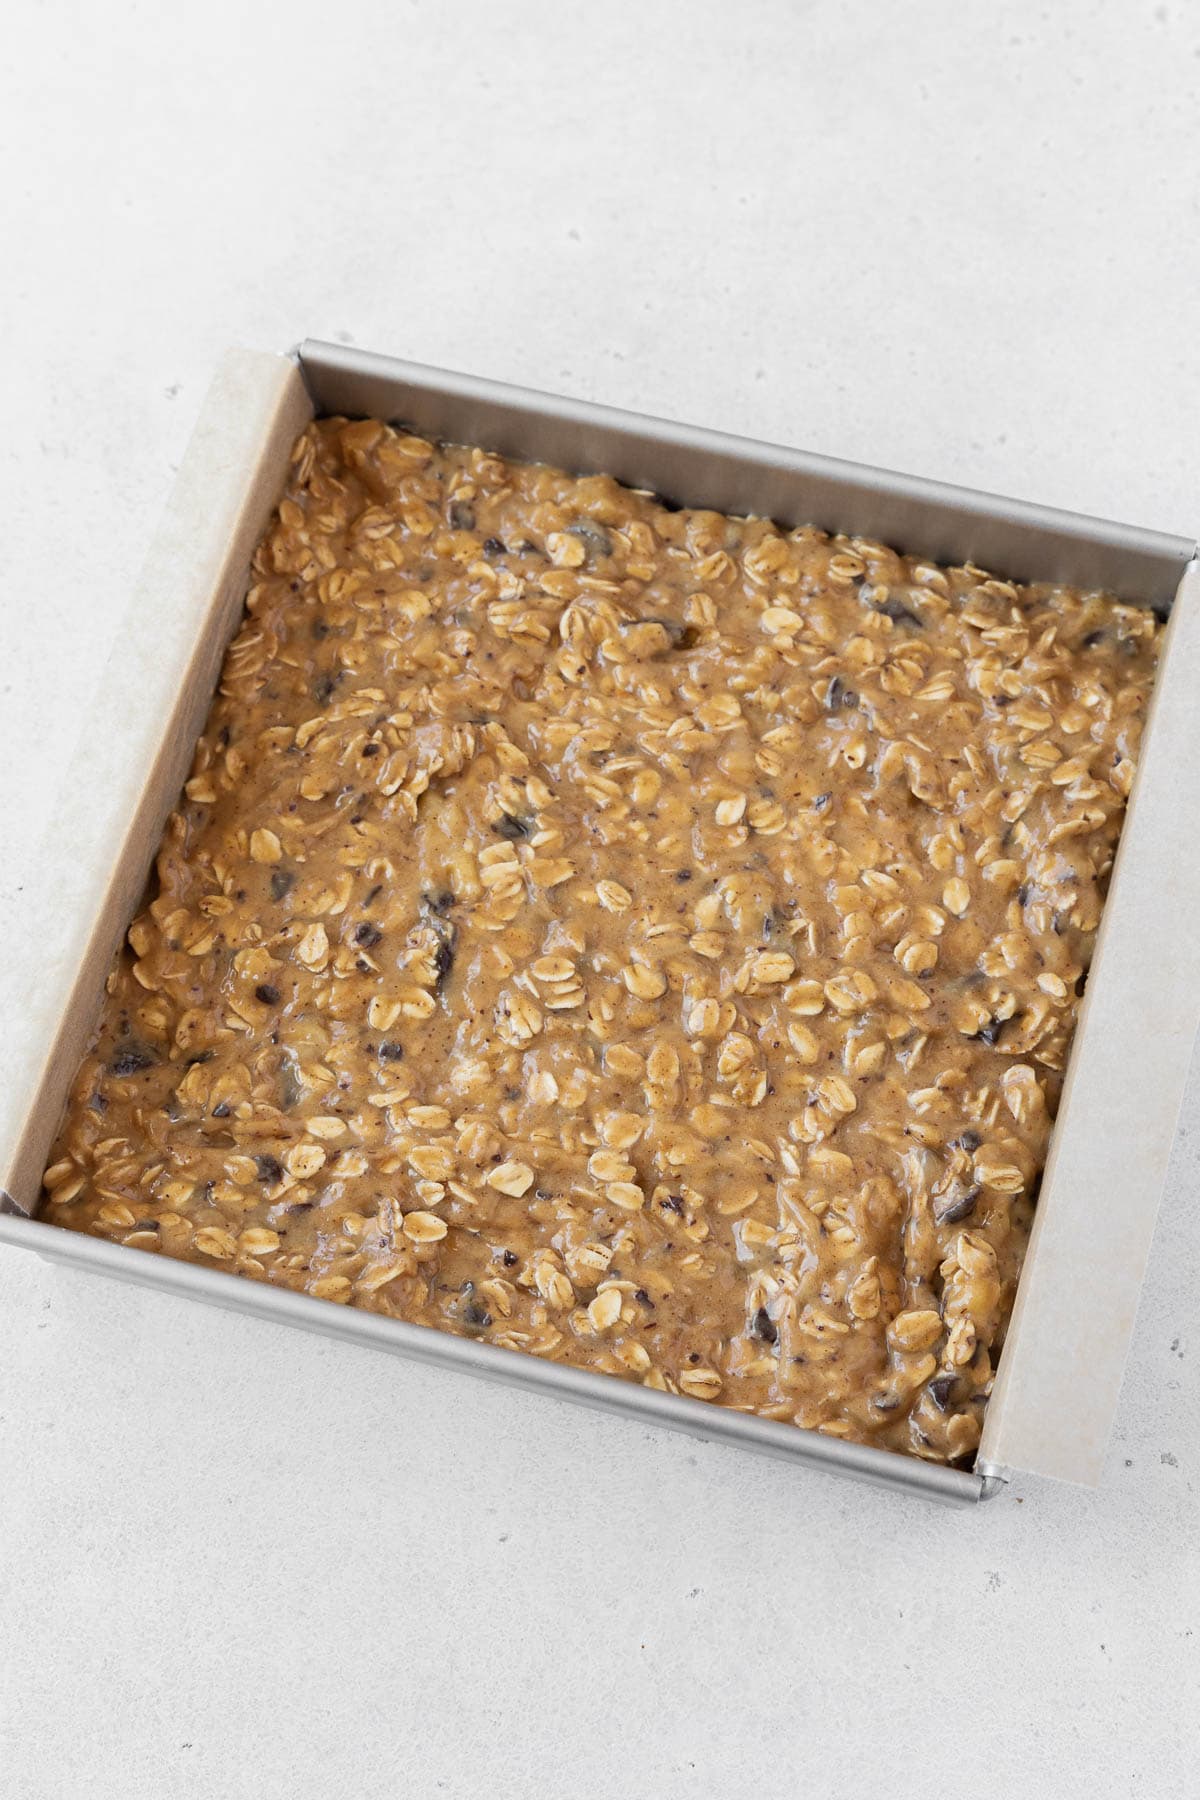 A pan of peanut butter banana oatmeal bars before going into the oven.